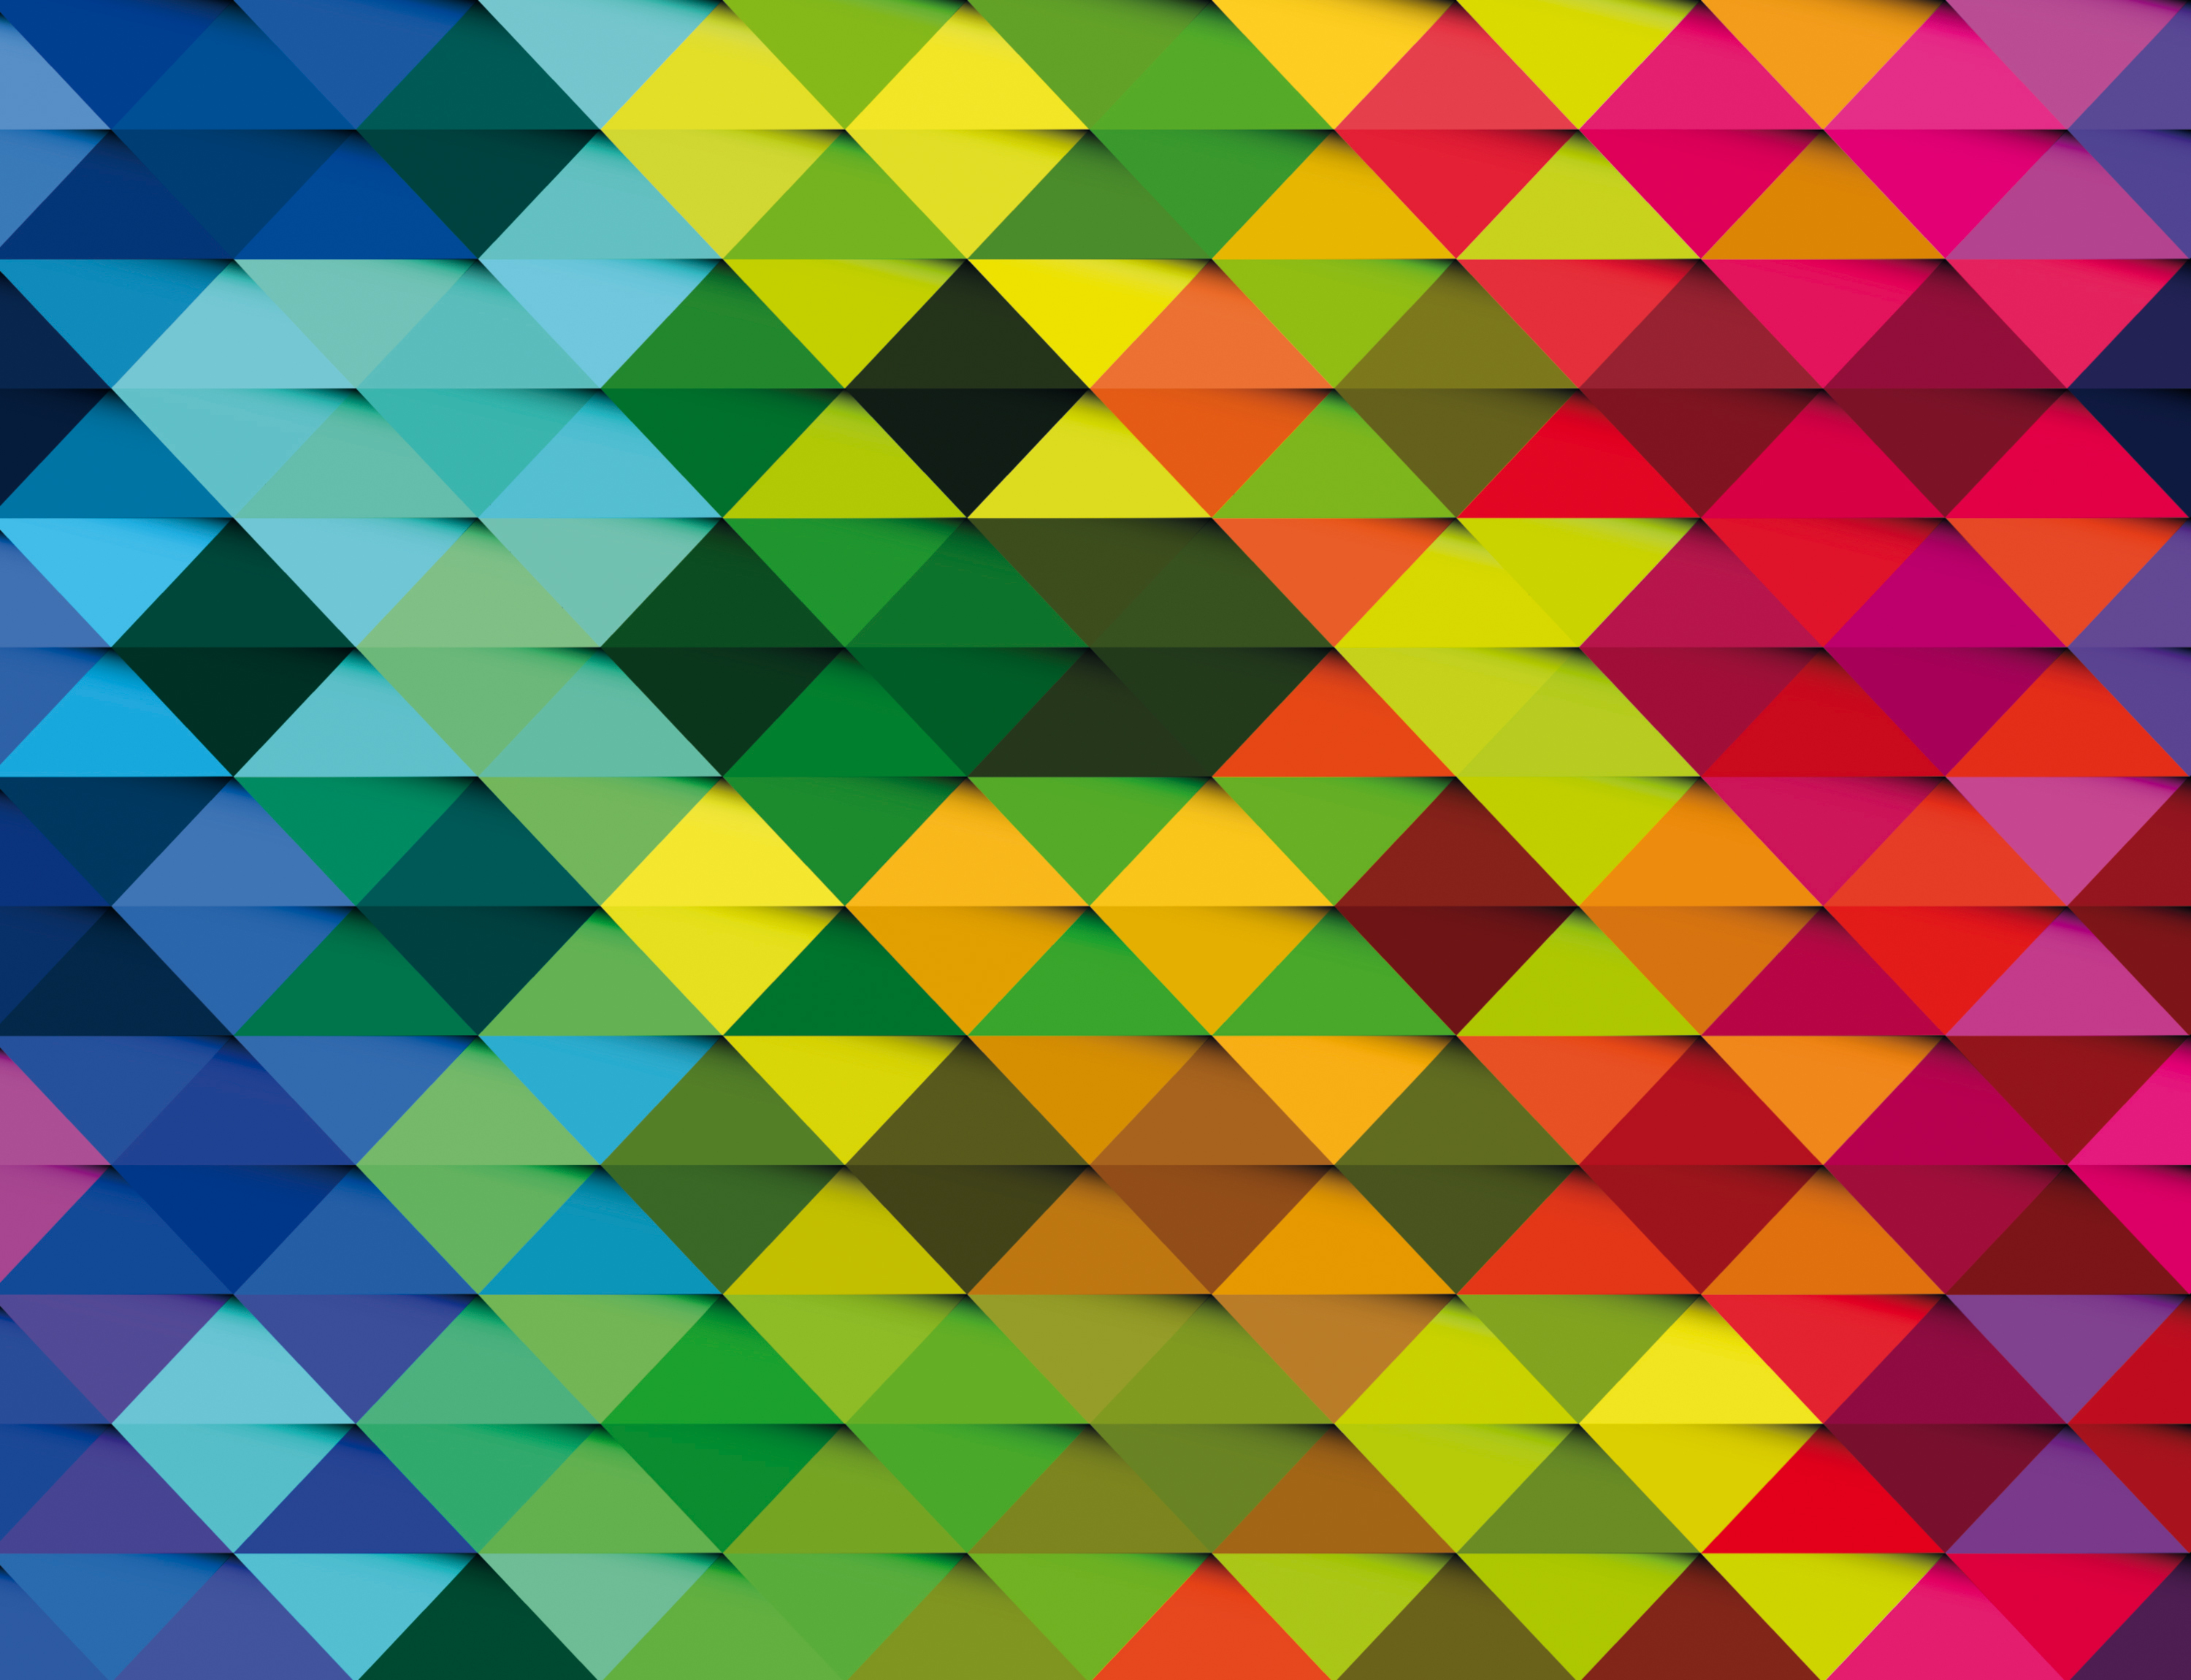 Download wallpaper 3000x2300 triangle, background, colorful, texture ...